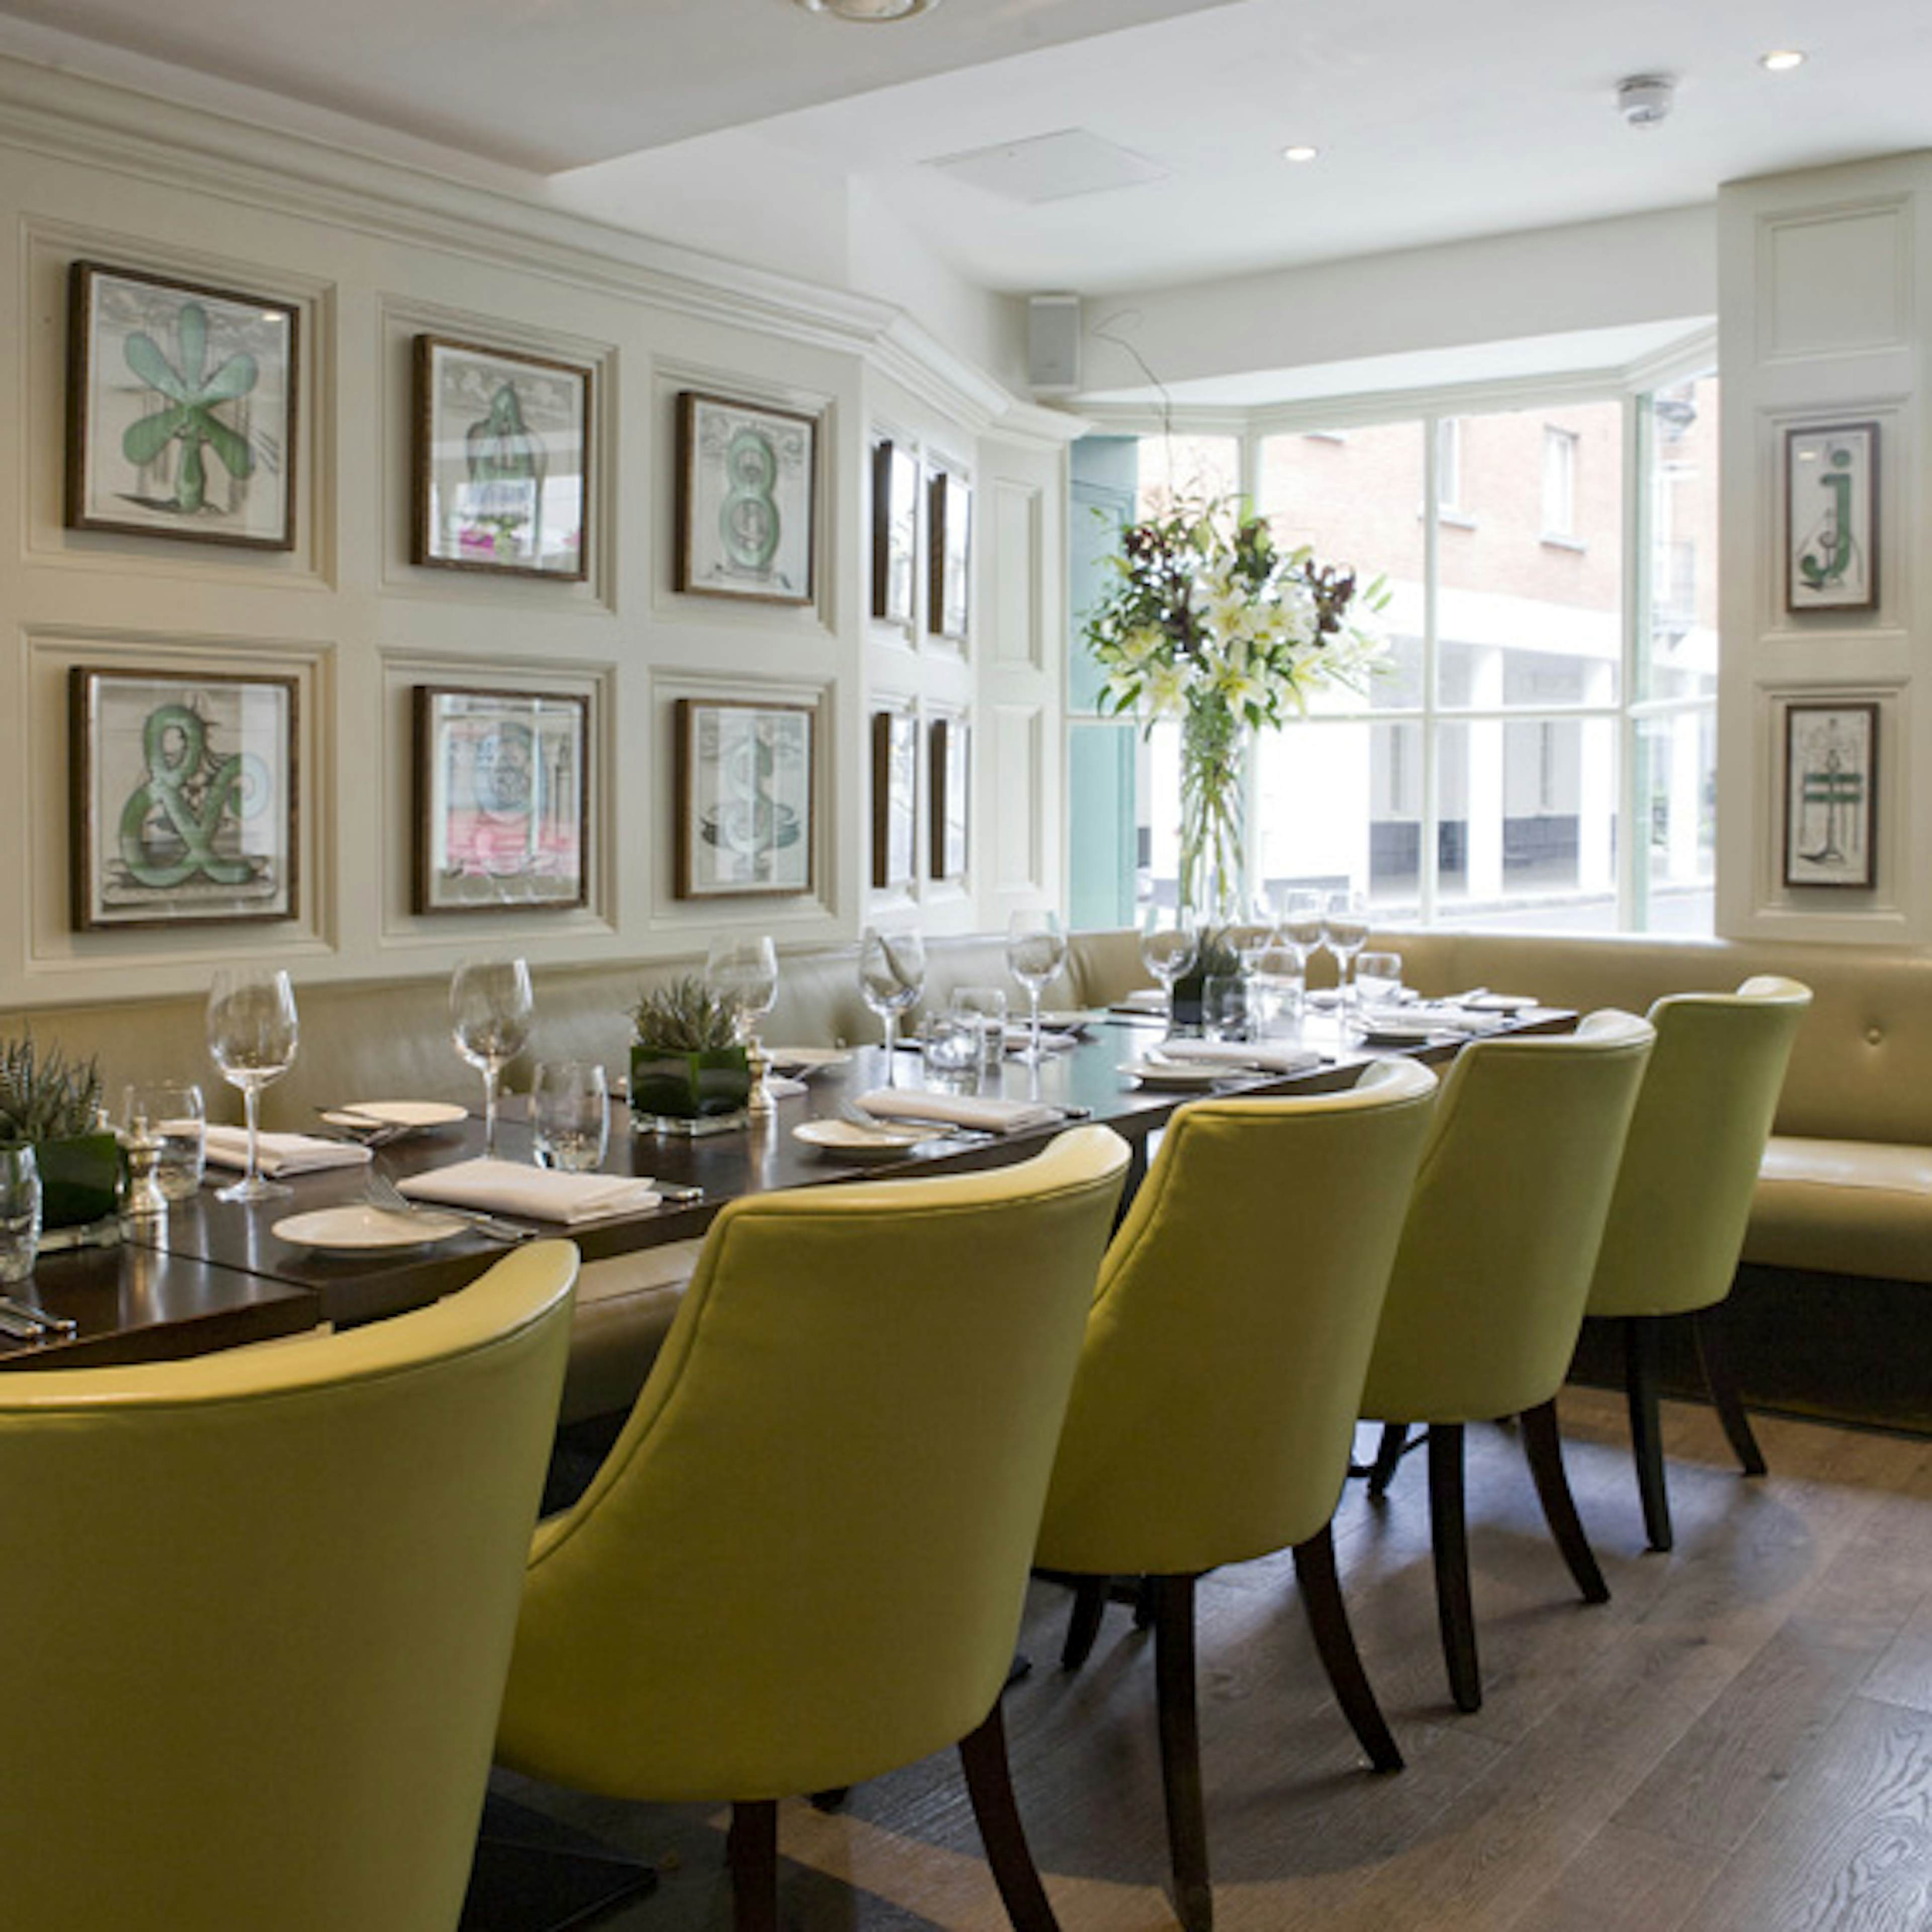 Chiswell Street Dining Rooms - The Snug image 2